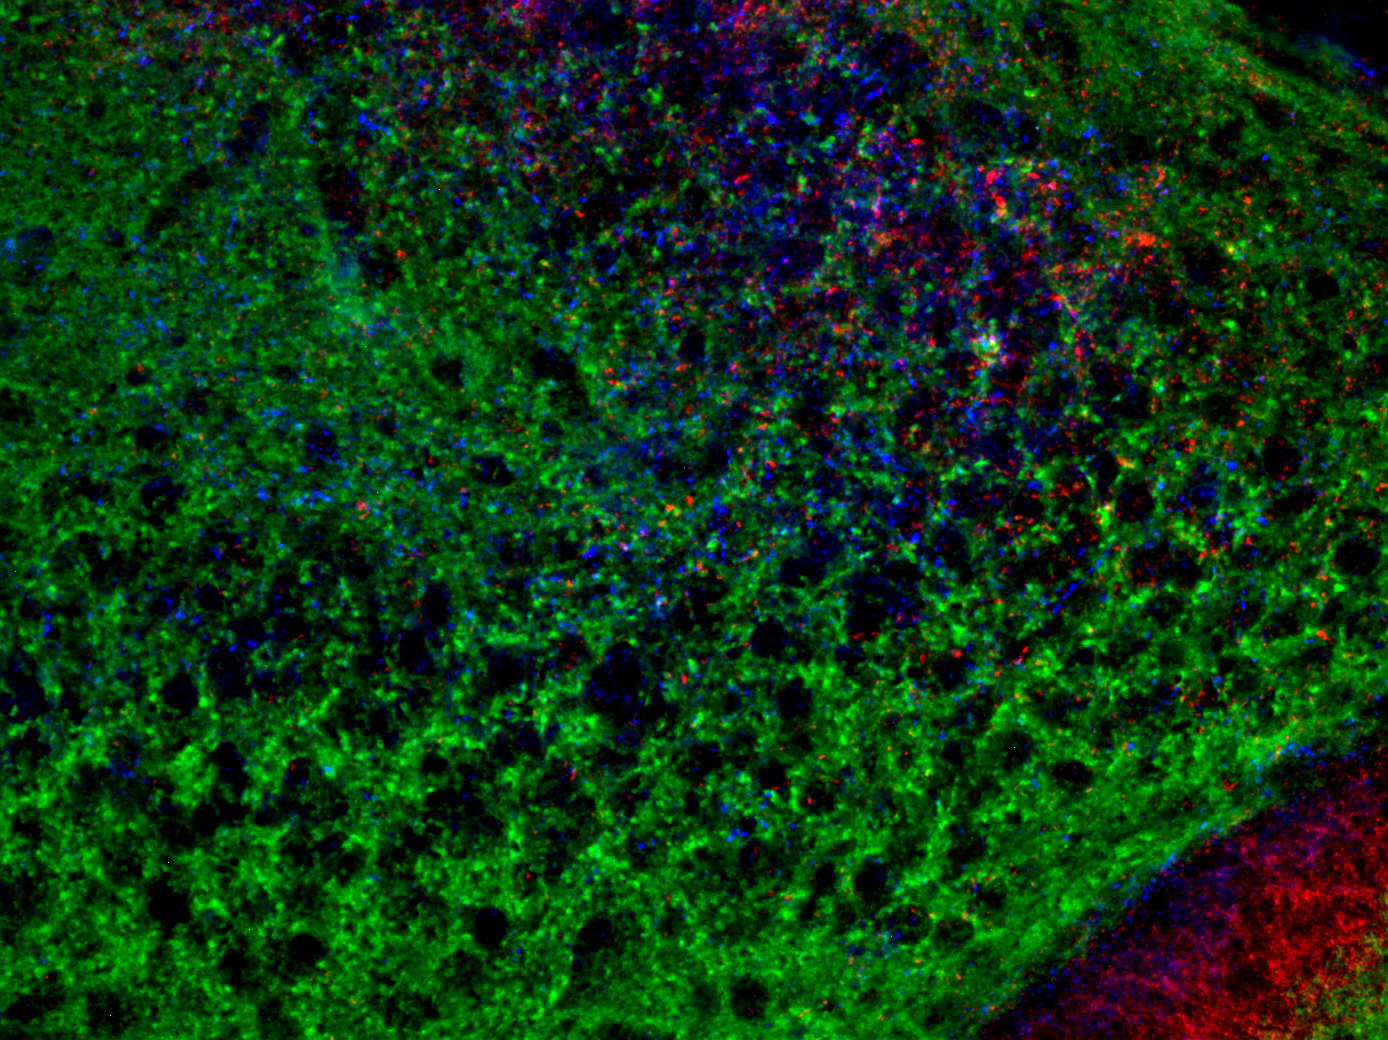 Triple immunostaining of VGLUT 1-3 in mouse brain demonstrating differential expression of the VGLUTs